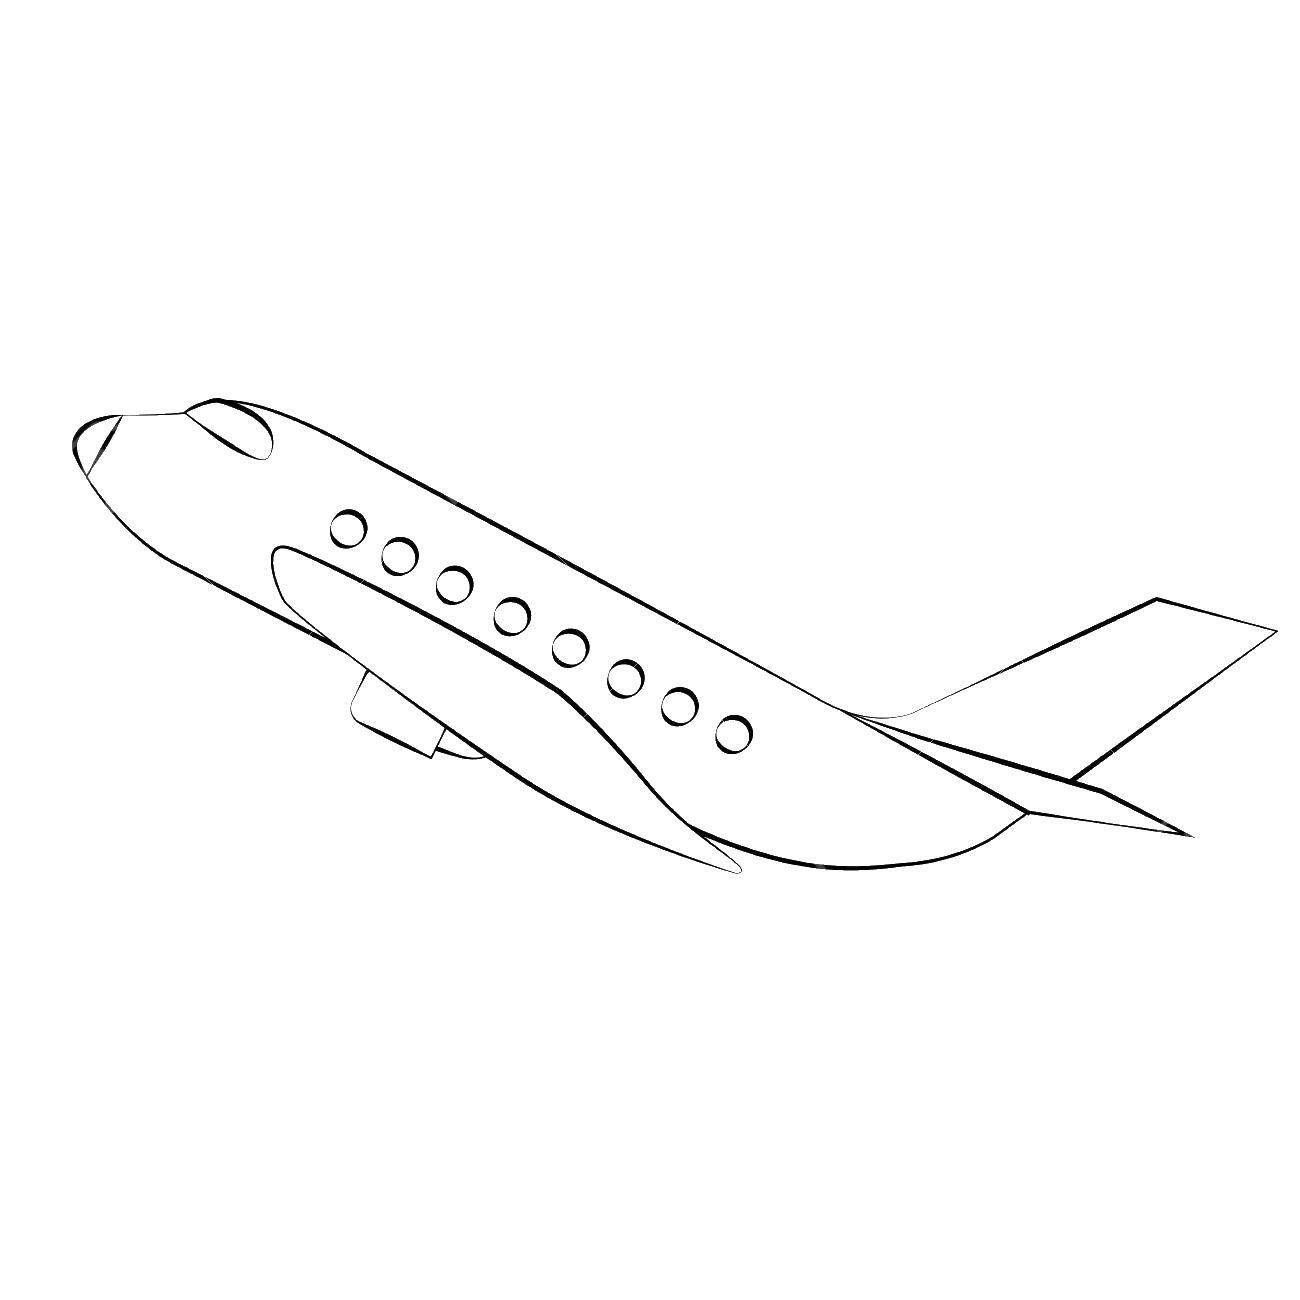 Coloring A jet plane at takeoff. Category The contour of the aircraft. Tags:  plane.